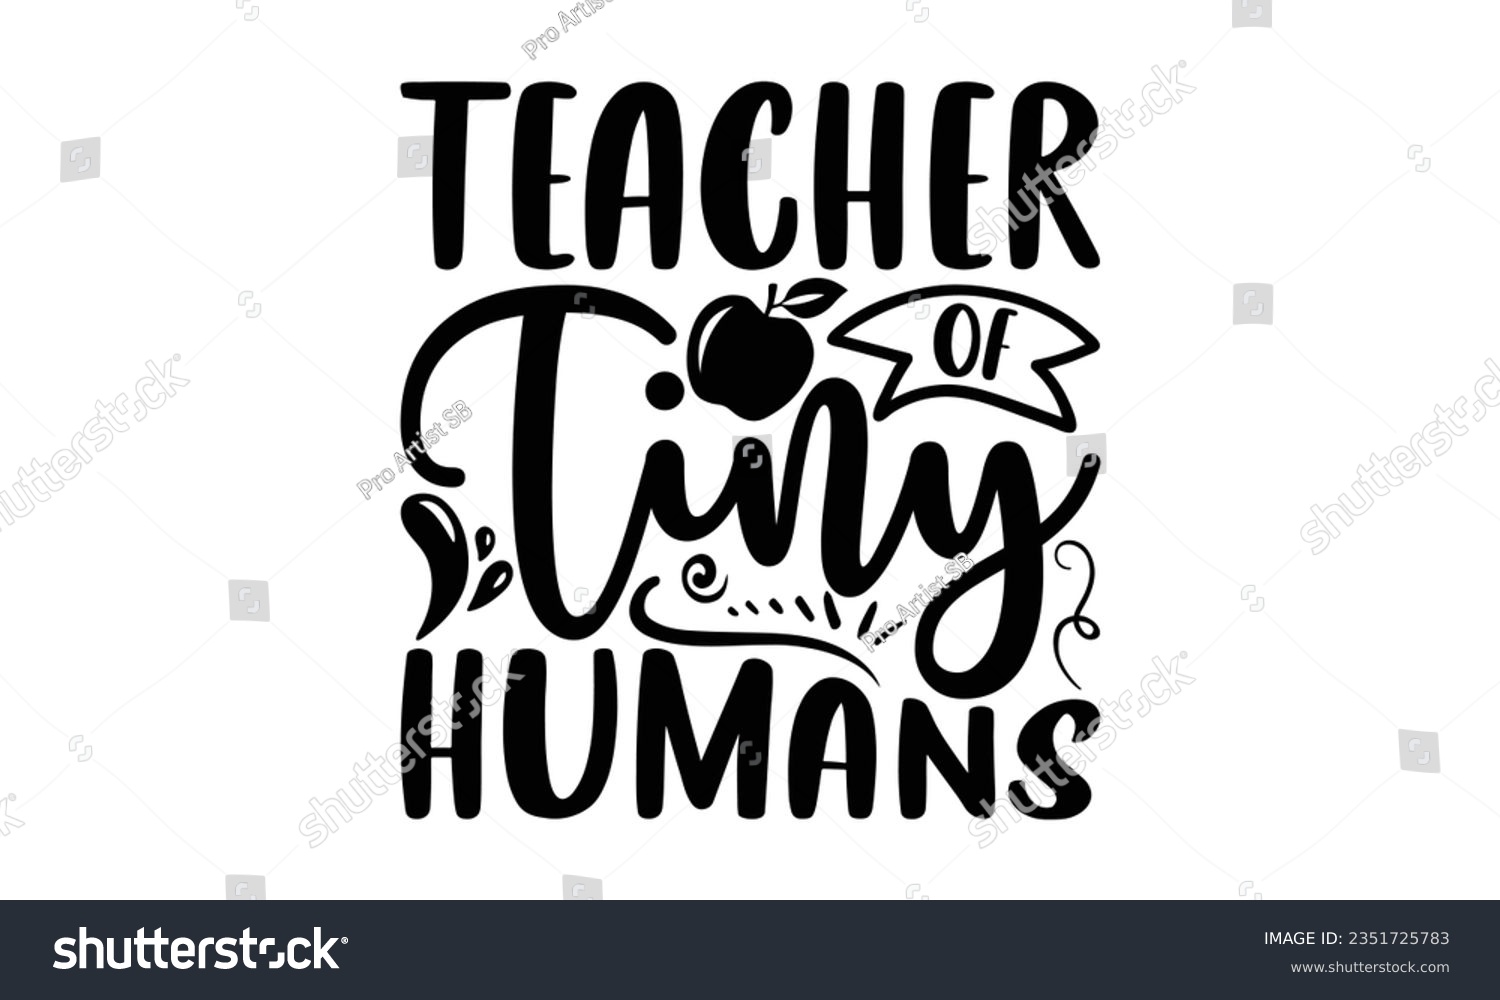 SVG of Teacher of tiny humans - Teacher SVG Design, Blessed Teacher Quotes, Calligraphy Graphic Design, Typography Poster with Old Style Camera and Quote. svg